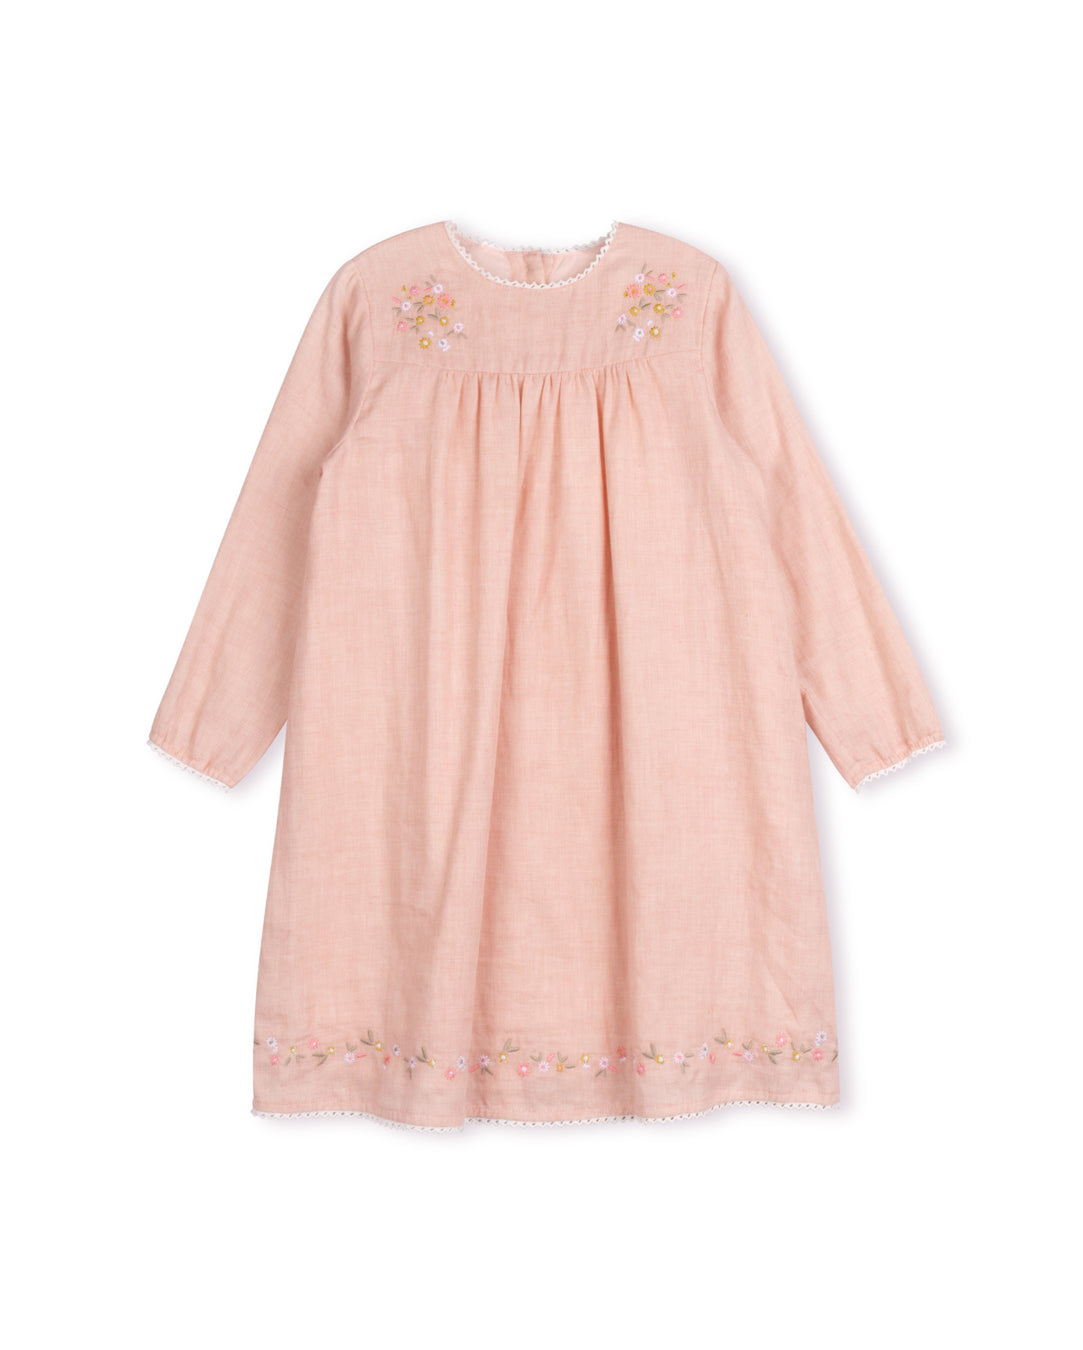 LILOU PINK EMBROIDERED FLORAL BABYDOLL DRESS